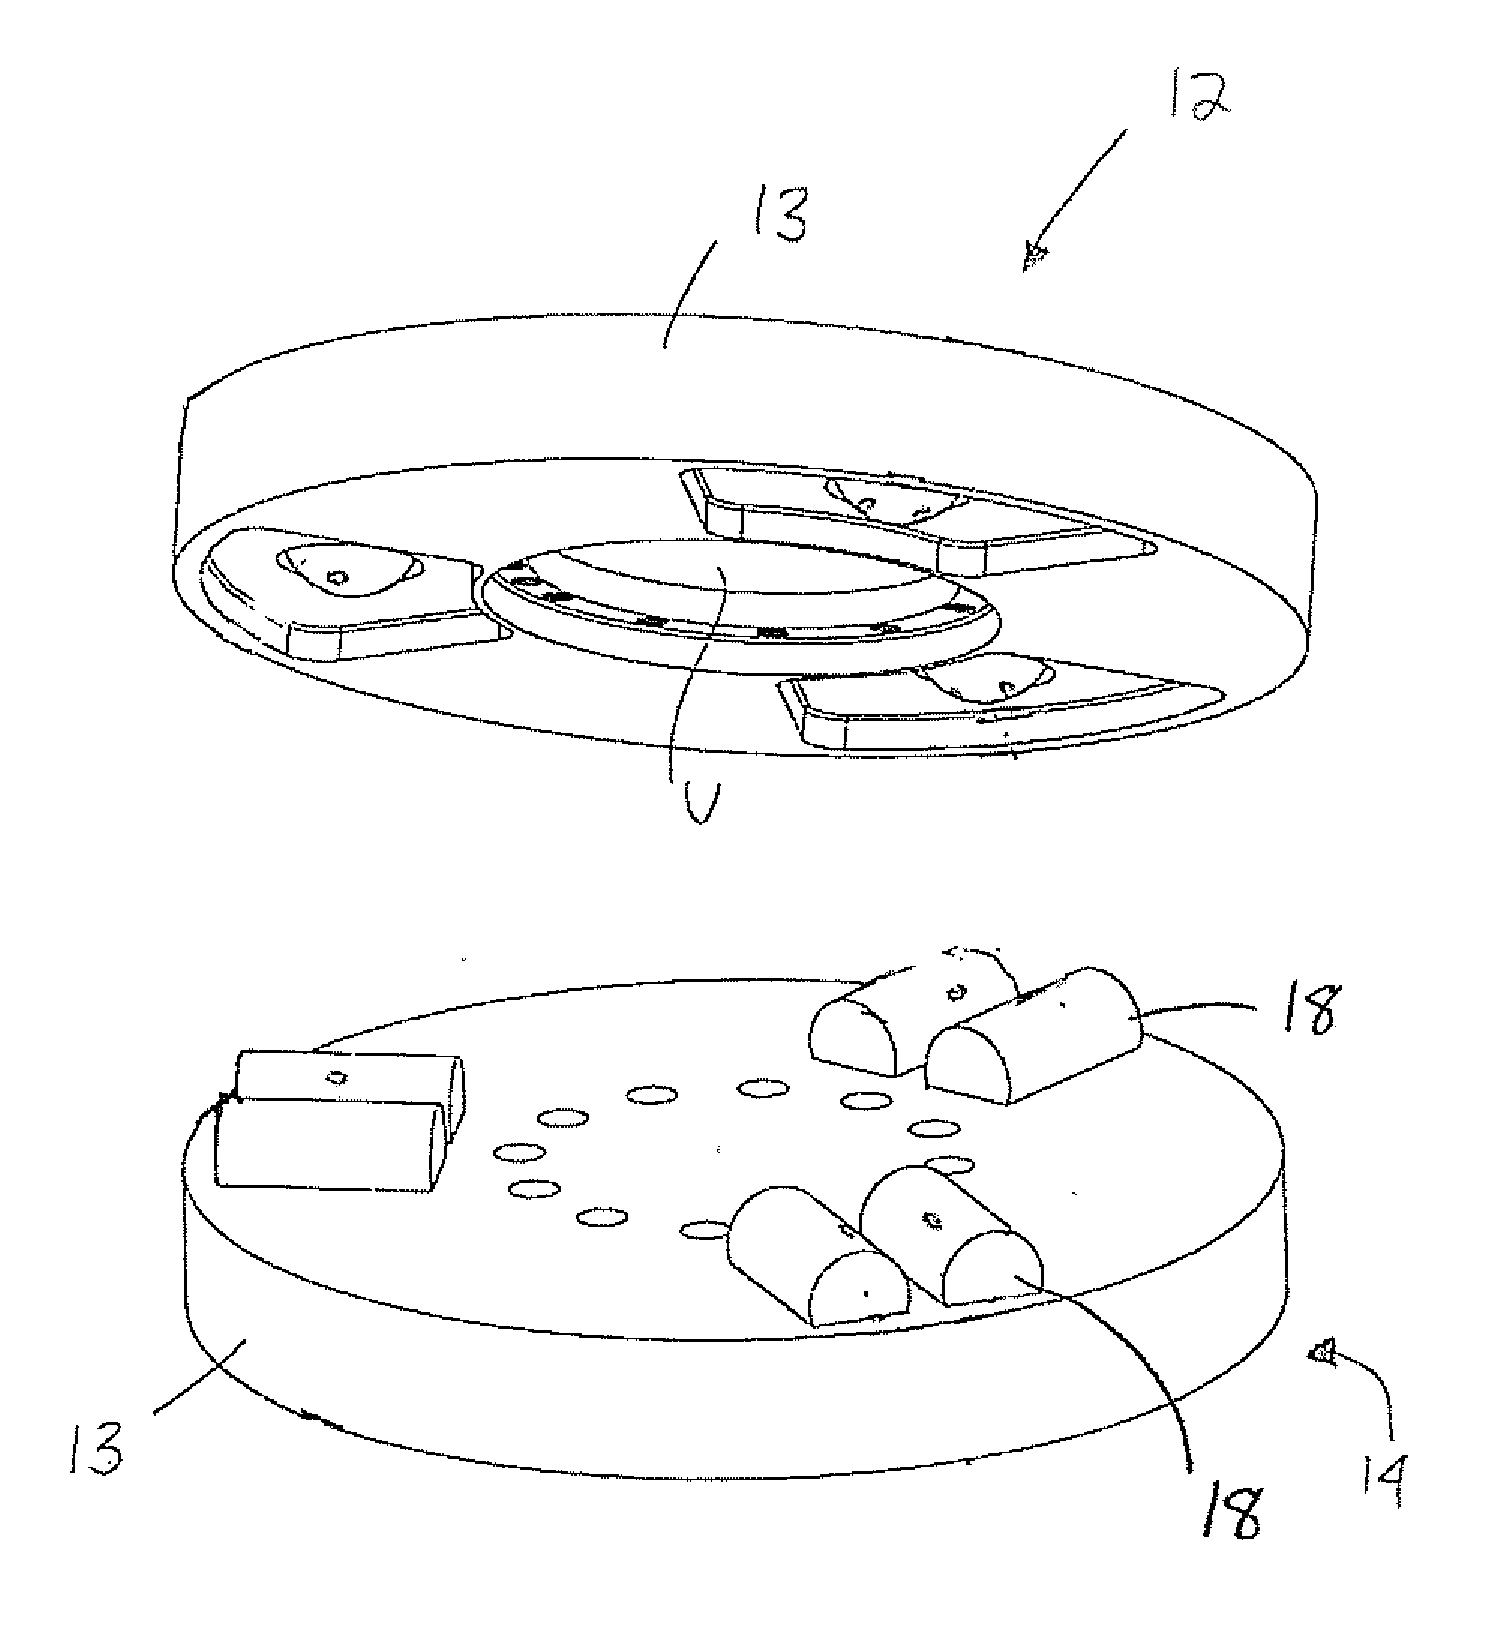 Apparatus for forming a kinematic coupling and related methods